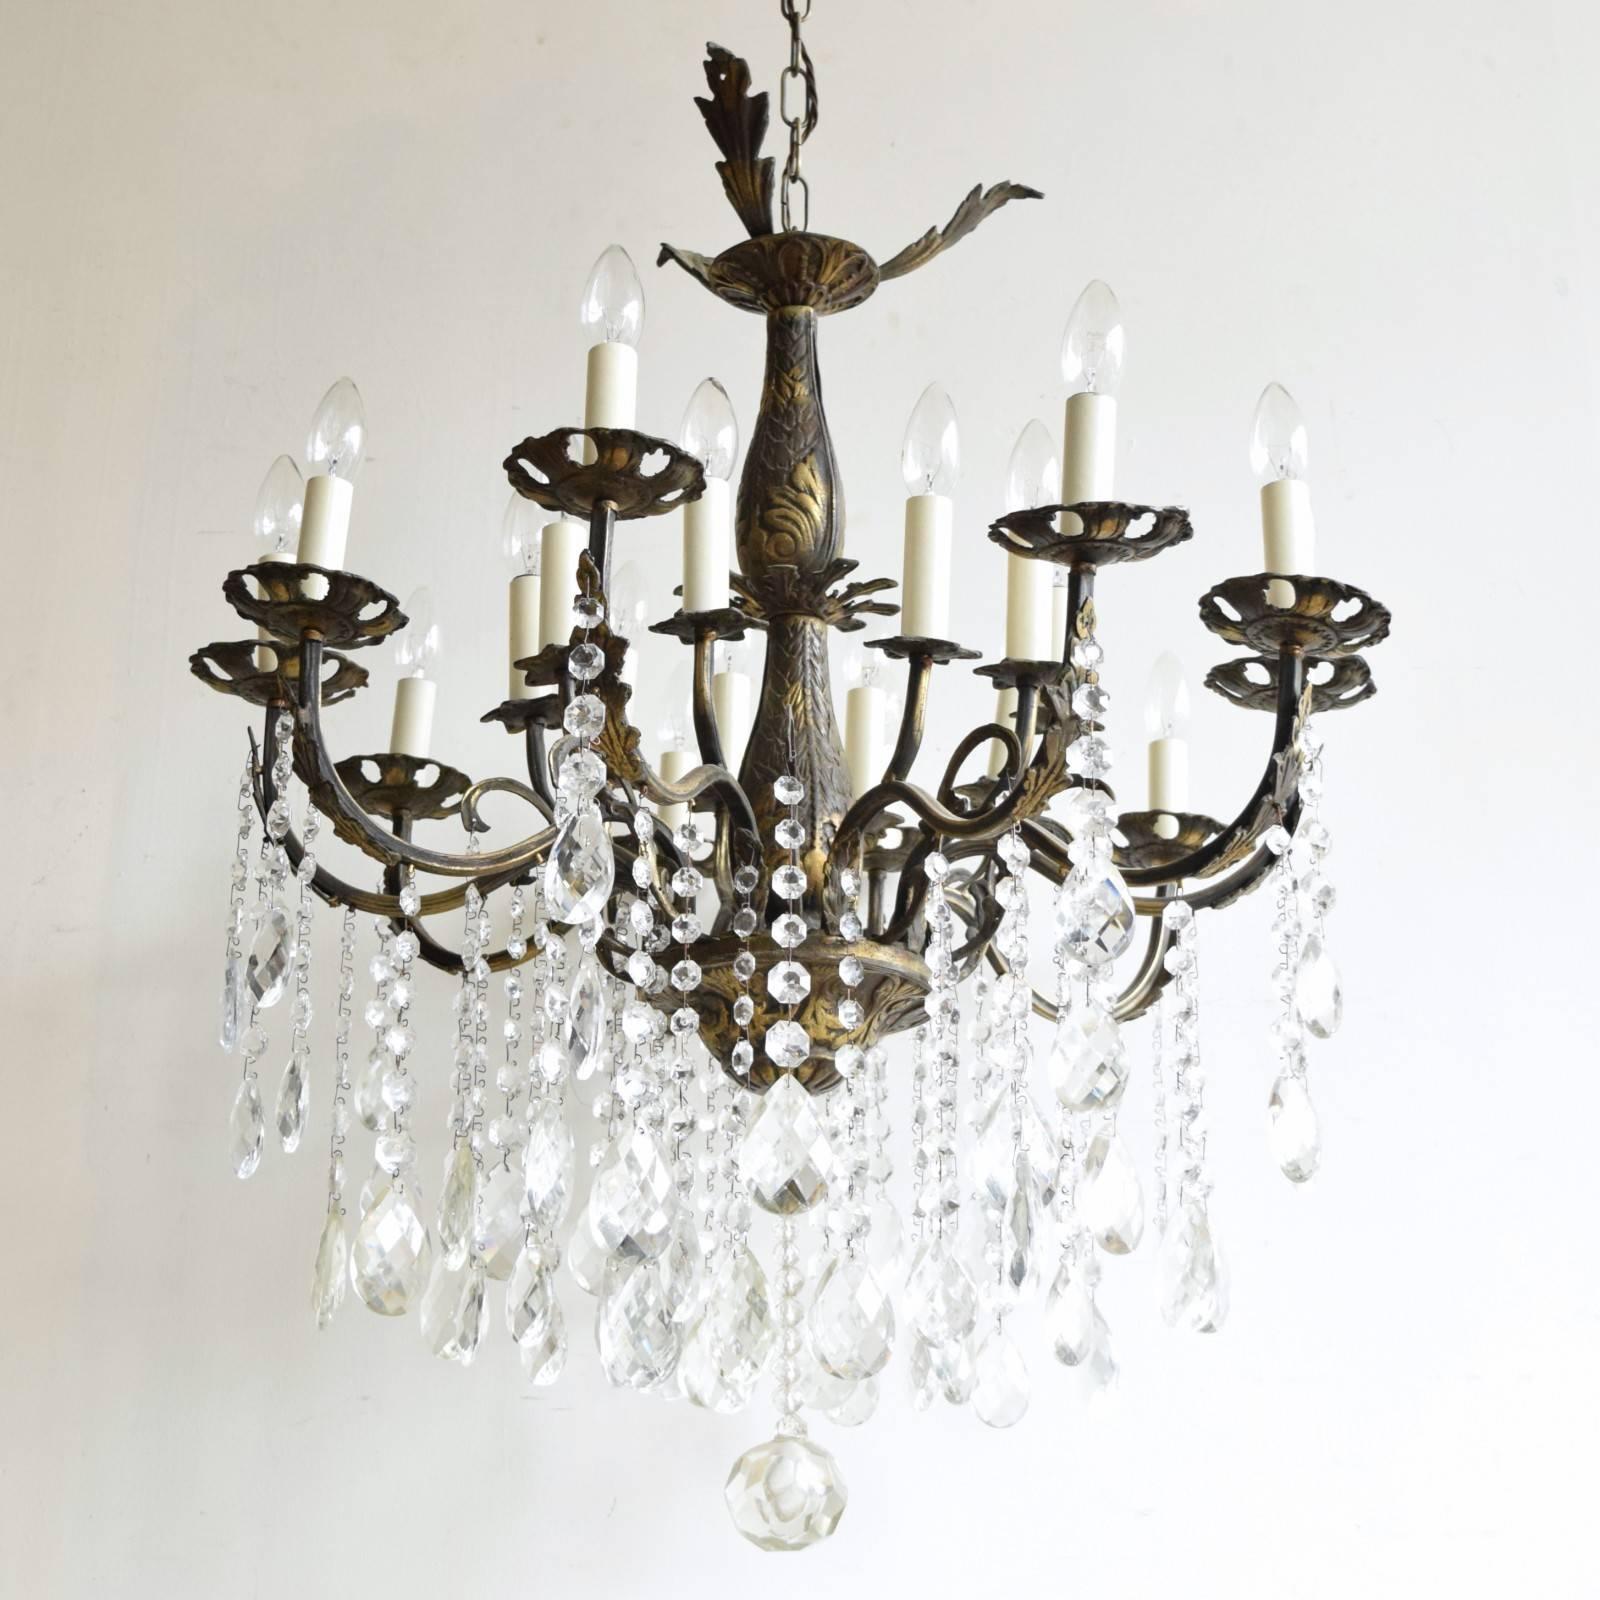 This large brass chandelier has sixteen lamps and dates from early 1900s, France. Its heavy cast brass frame has oxidised over time. We have taken care to leave this natural aged patina when restoring the piece. Dressed in strings of glass buttons